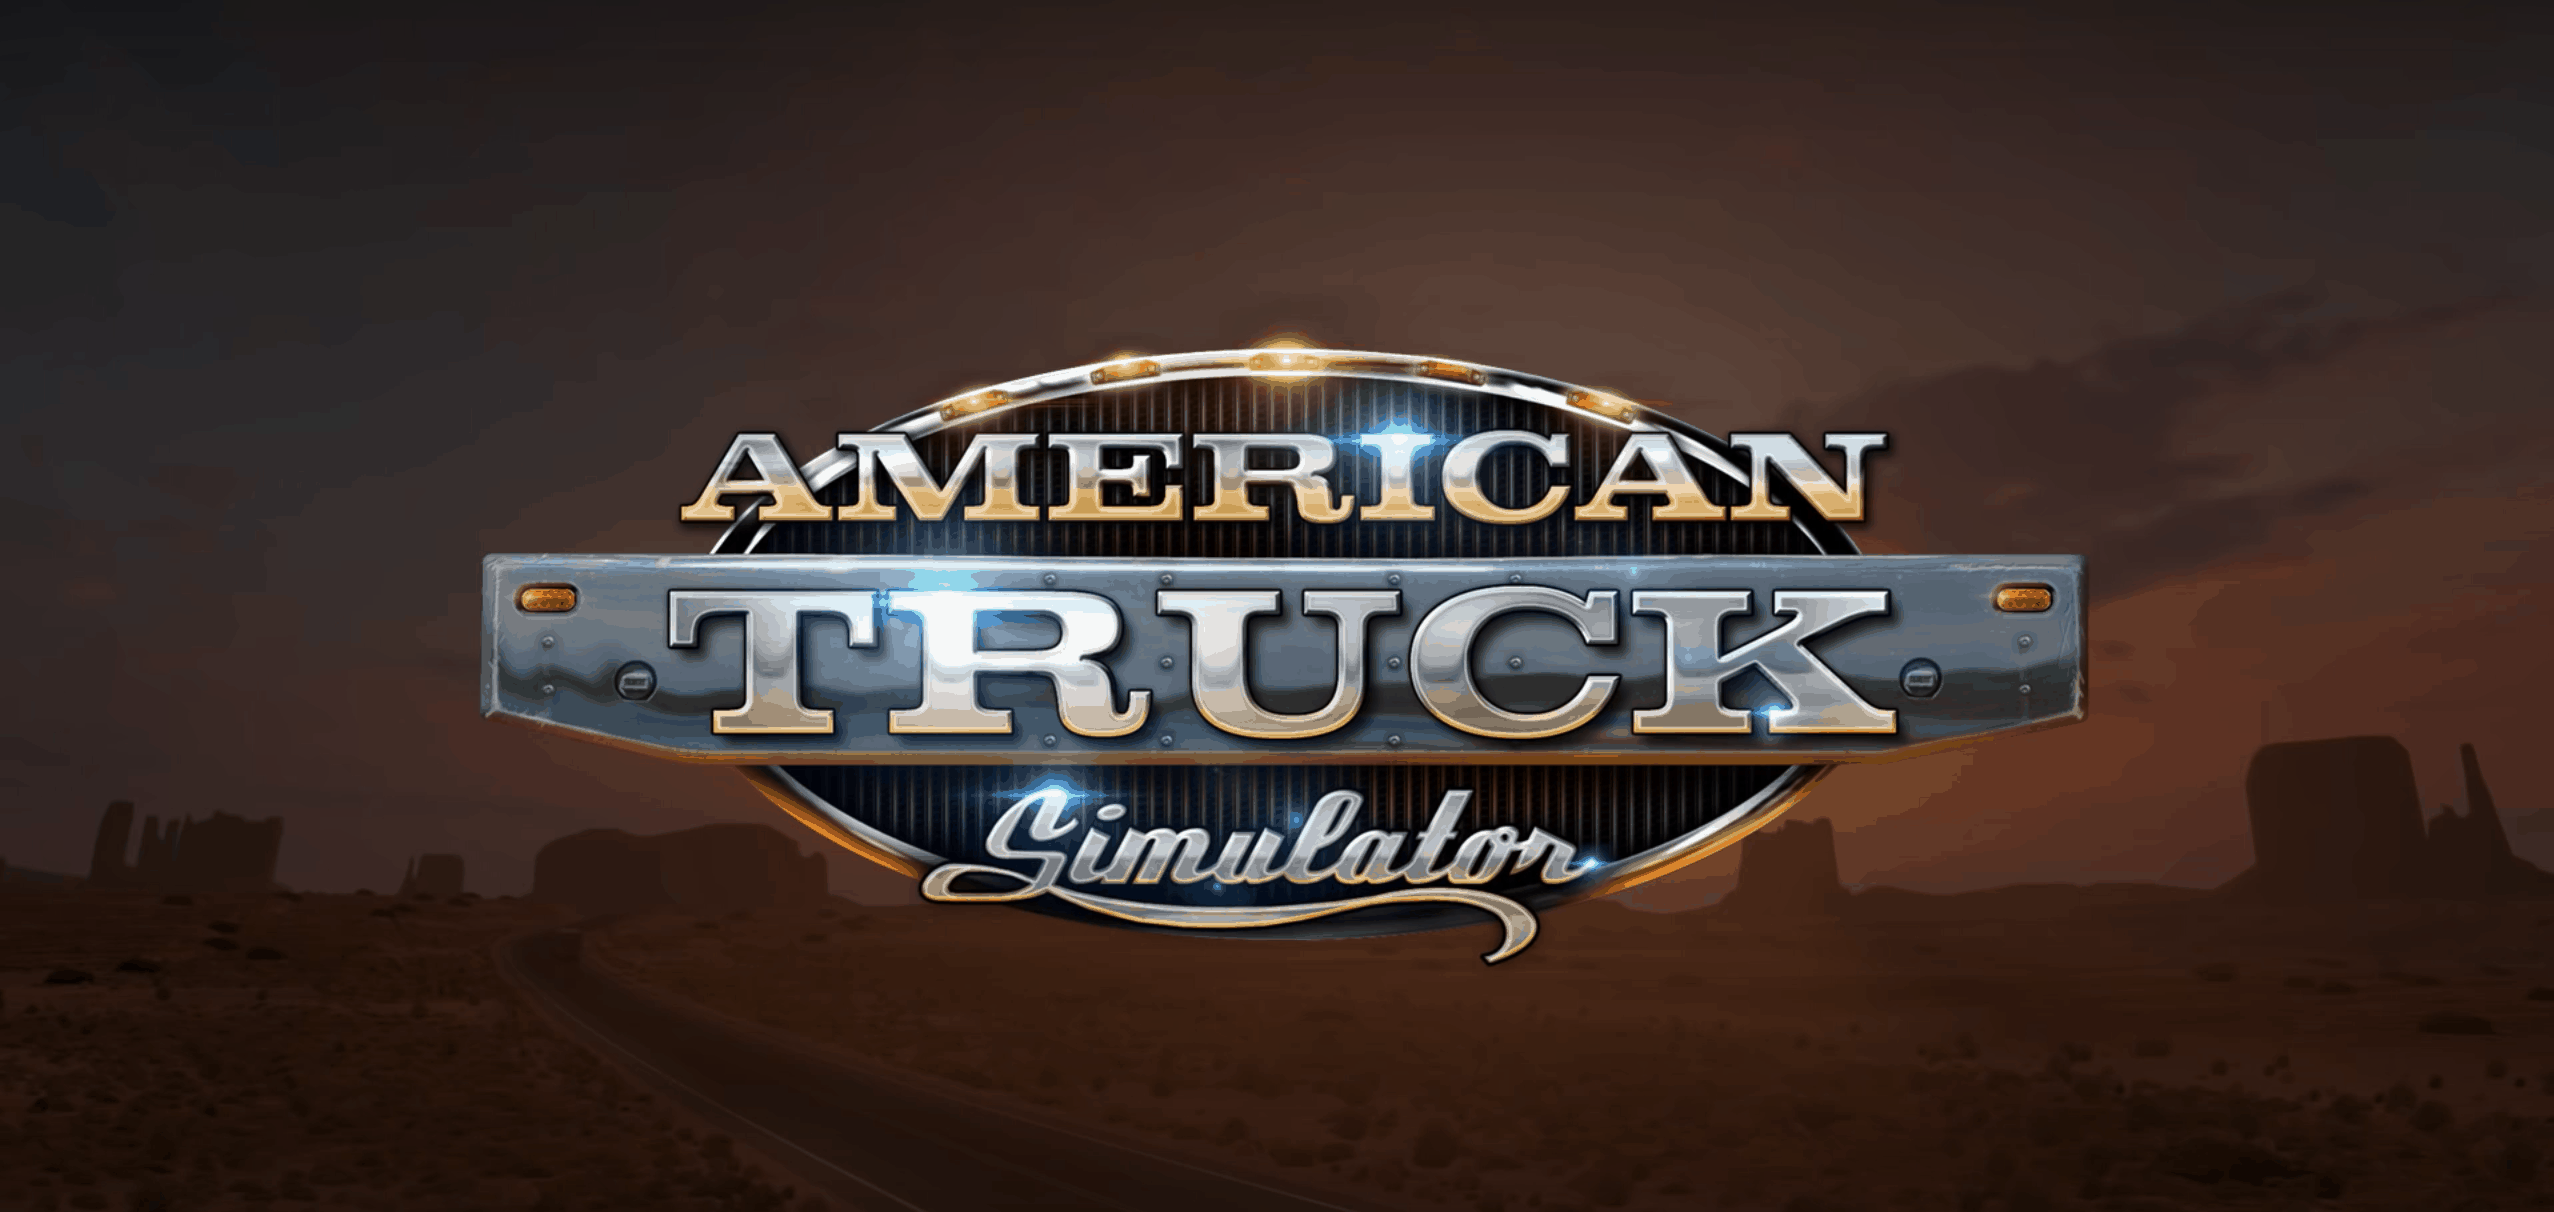 American-Truck-Simulator-%E2%80%93-Important-Security-Announcement.png